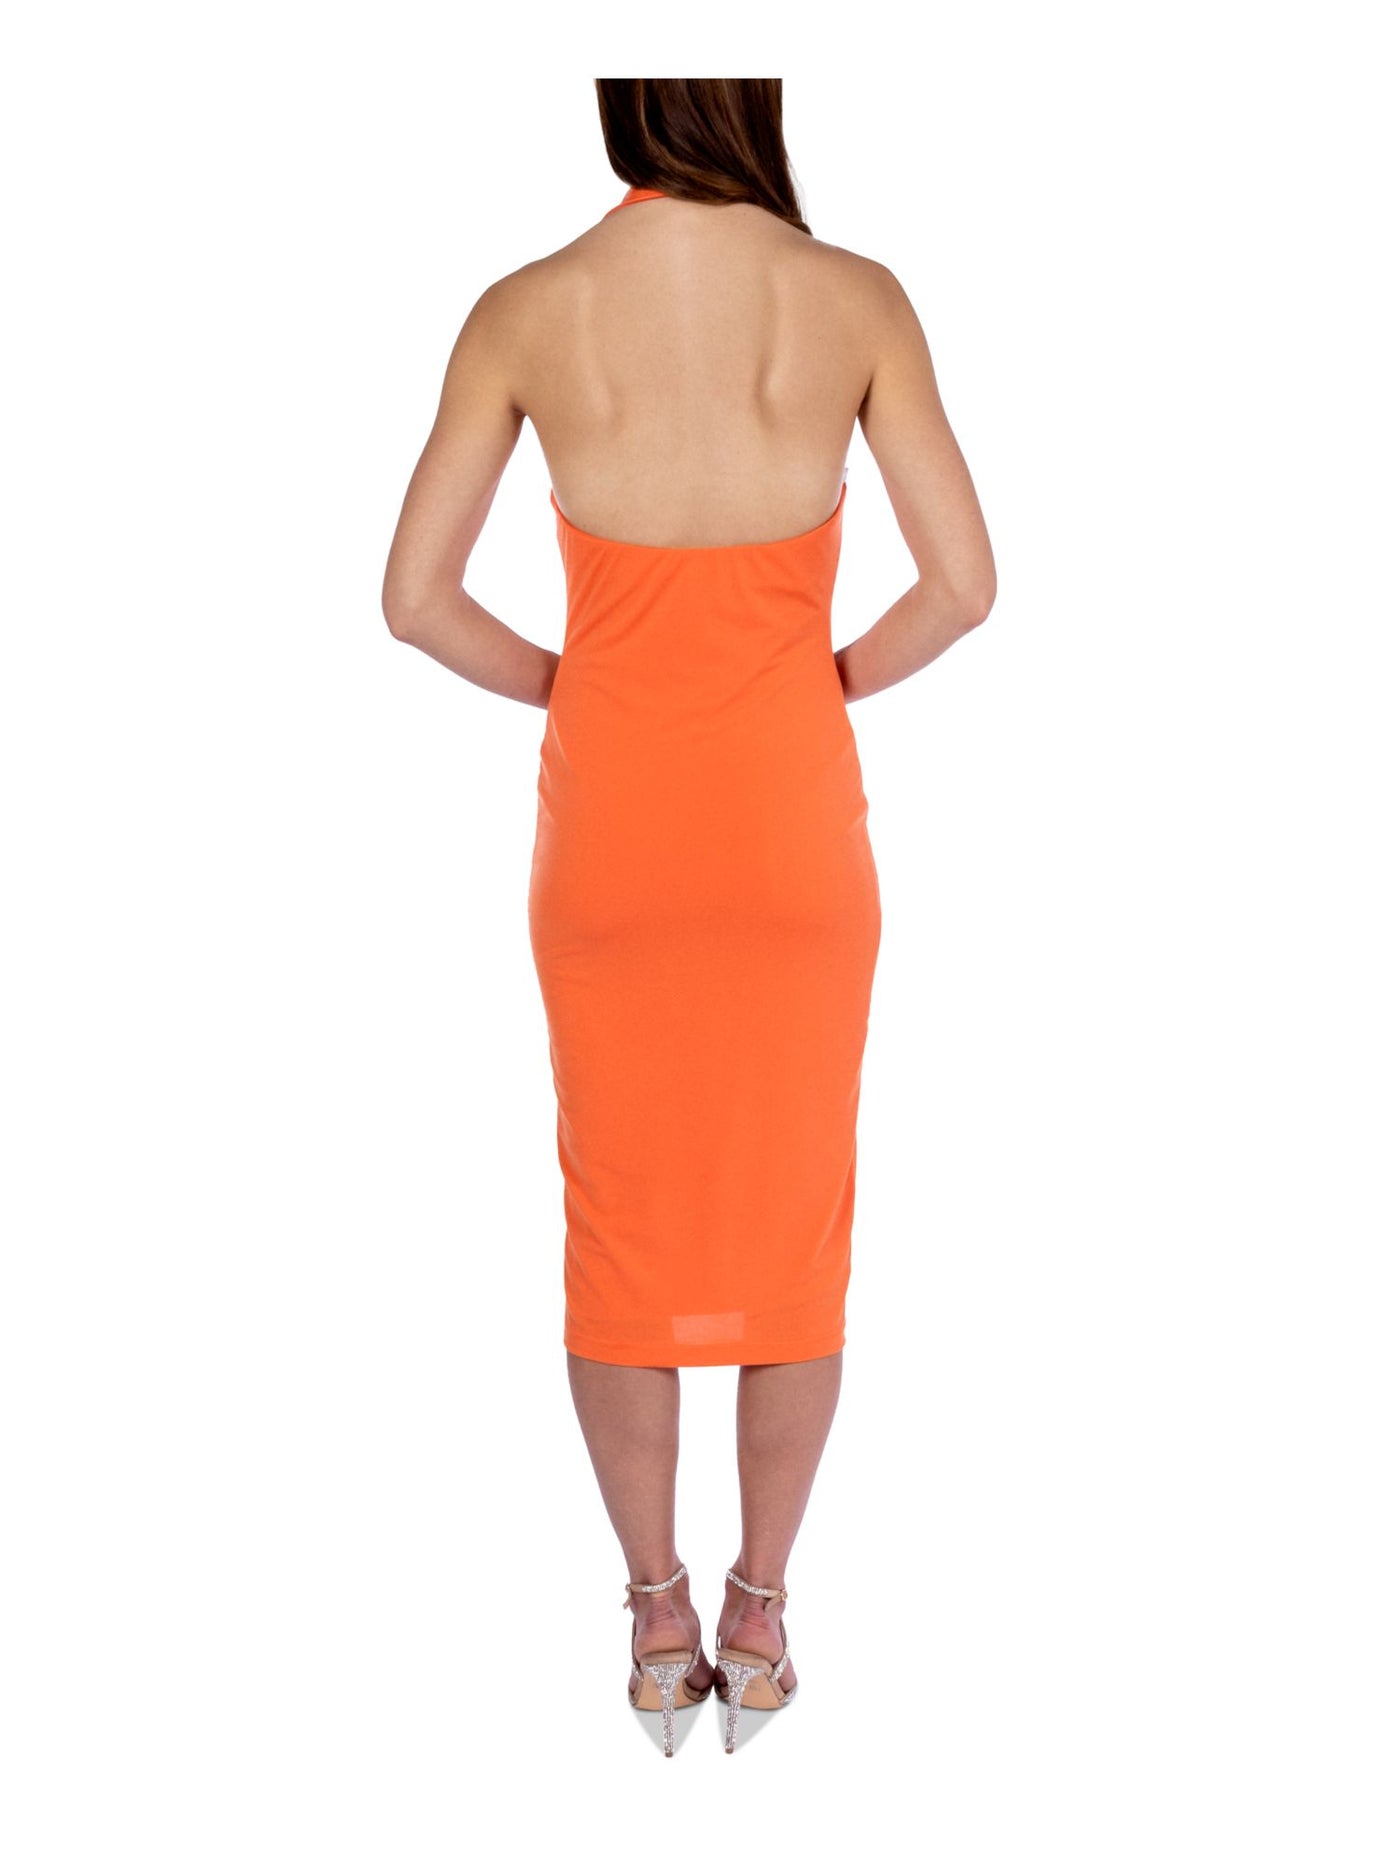 B DARLIN Womens Orange Cut Out Pullover Collared Lined Sleeveless Halter Midi Party Body Con Dress Juniors XXS